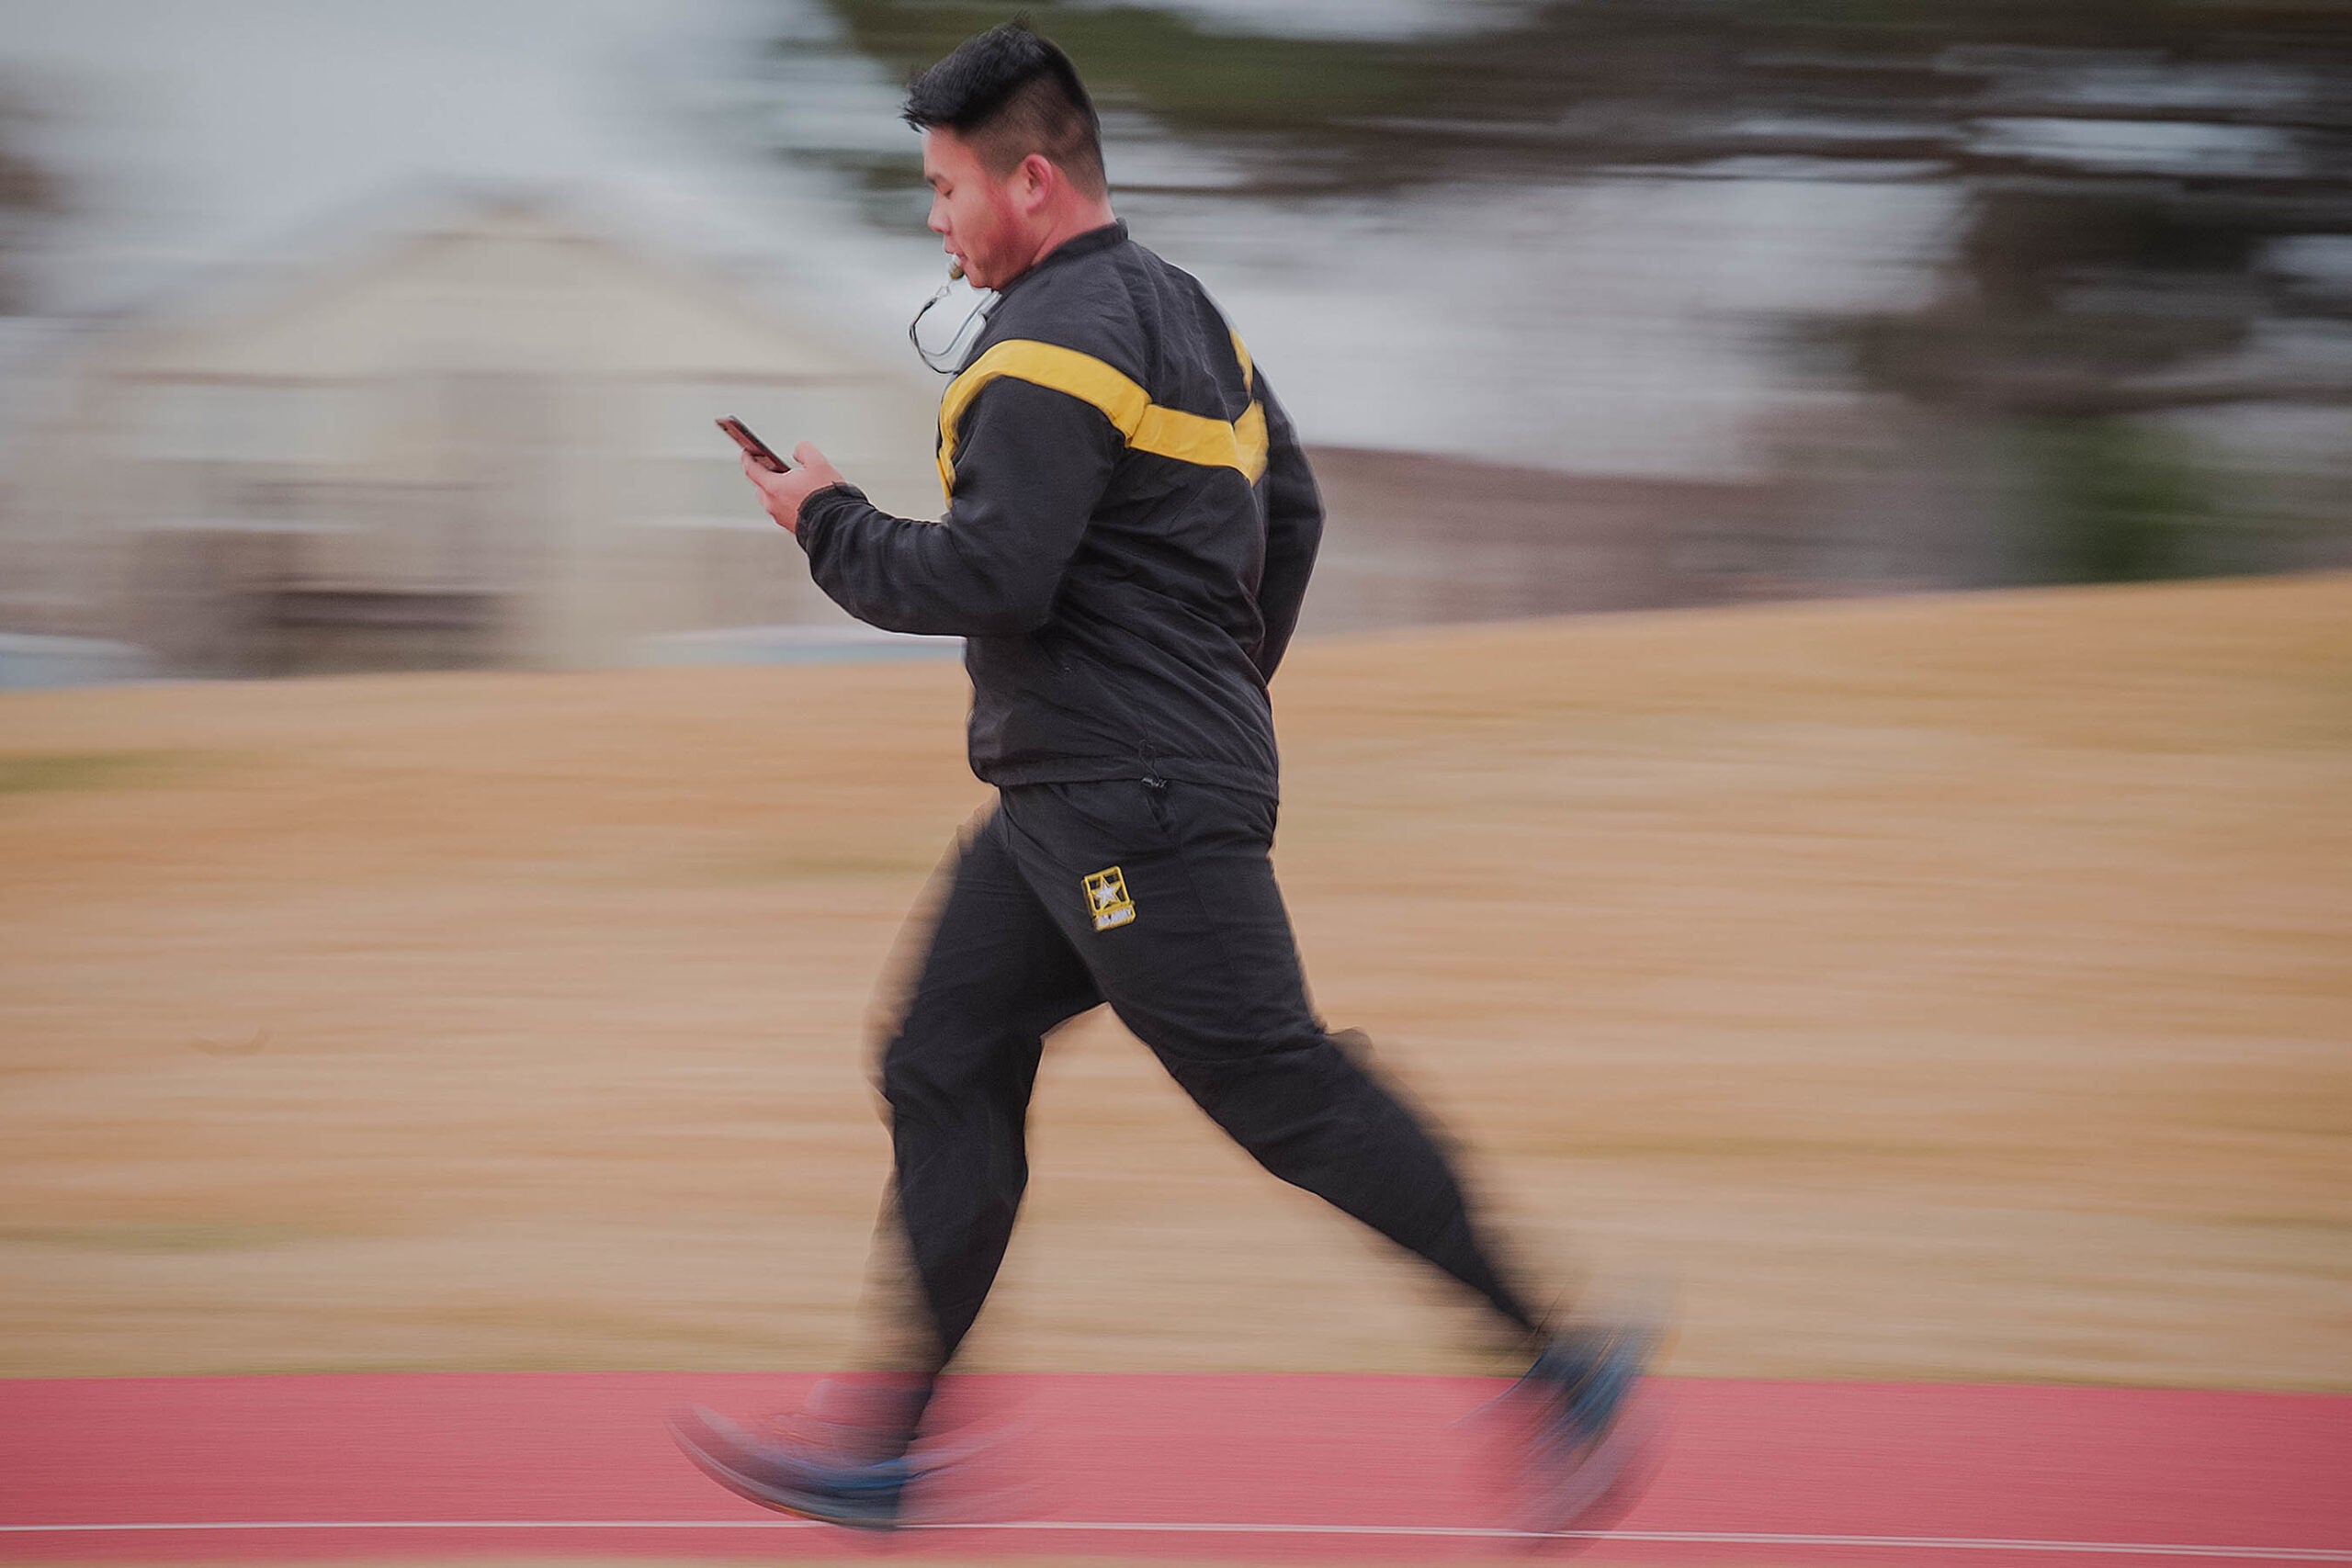 As class leader for the evening workout, Sgt. Lixing Dai monitors the time on his smartphone. Dai had the class sprinting, fast walking, then sprinting again in timed increments. Sgt. Dai monitored the time, blowing his whistle to begin or end each walk/run cycle.